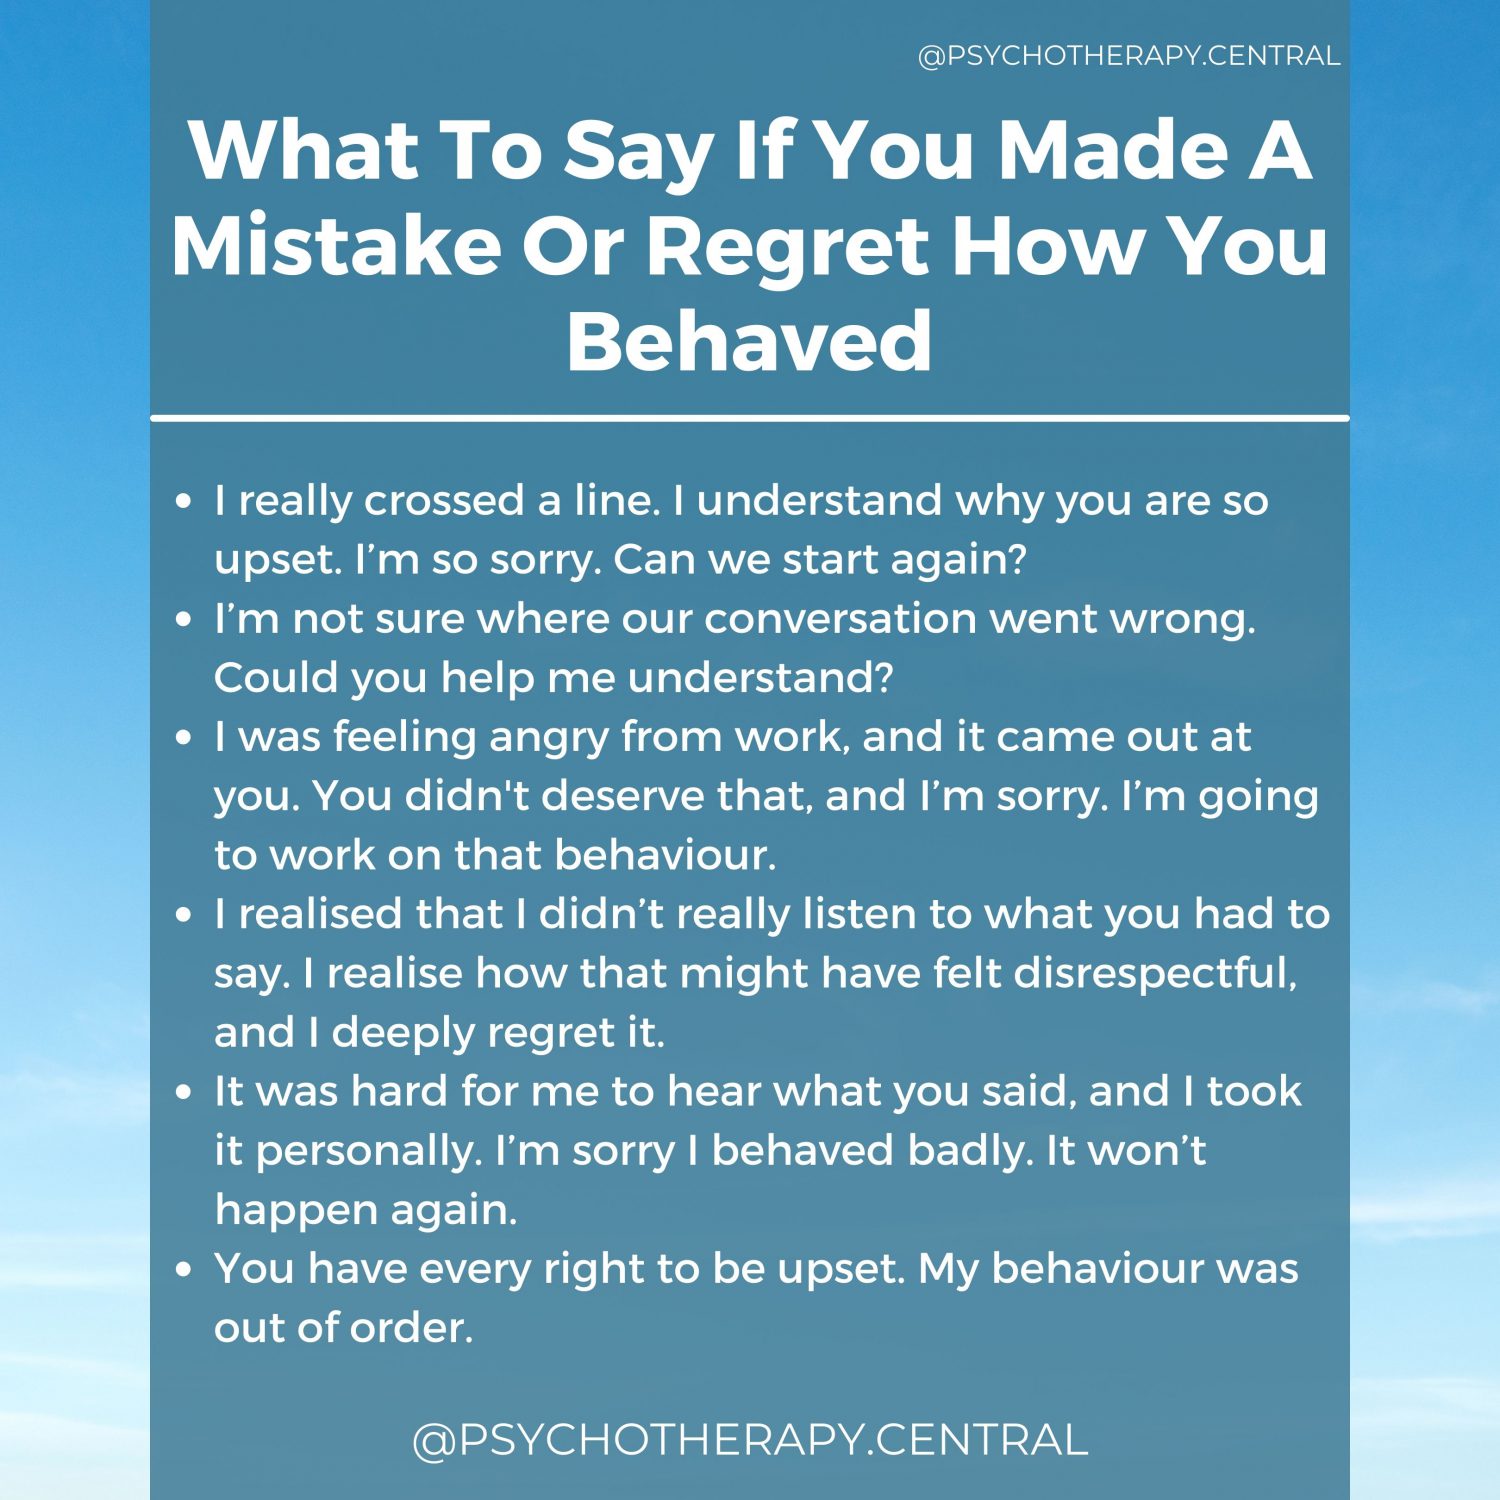 What To Say If You Made A Mistake Or Regret How You Behaved. I really crossed a line. I understand why you are so upset. I’m so sorry. Can we start again? I’m not sure where our conversation went wrong. Could you help me understand? I was feeling angry from work, and it came out at you. You didn't deserve that, and I’m sorry. I’m going to work on that behaviour. I realised that I didn’t really listen to what you had to say. I realise how that might have felt disrespectful, and I deeply regret it. It was hard for me to hear what you said, and I took it personally. I’m sorry I behaved badly. It won’t happen again. You have every right to be upset. My behaviour was out of order.